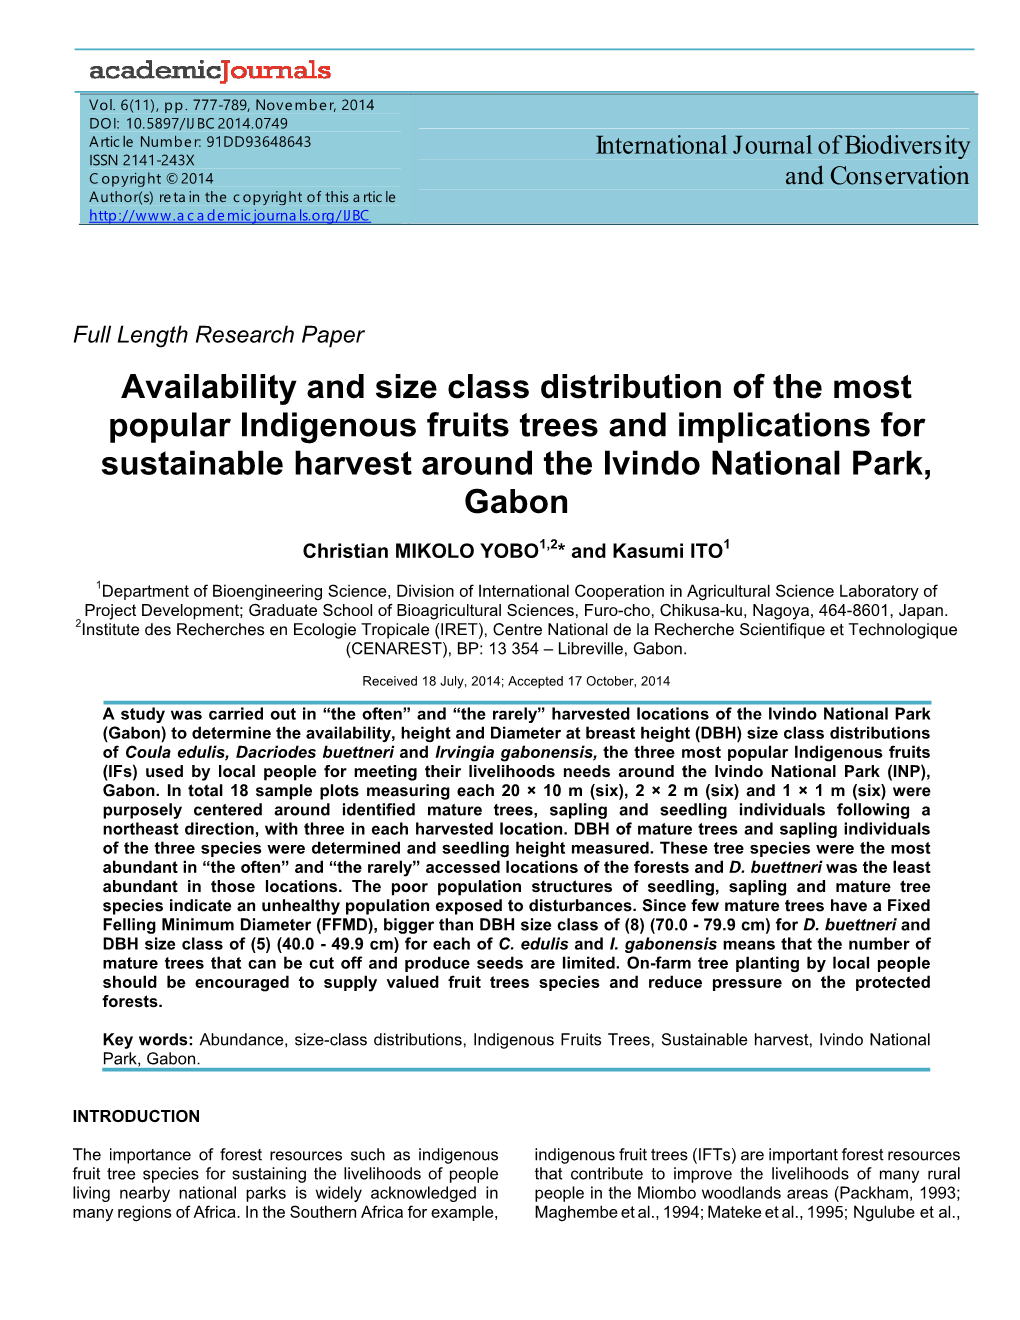 Availability and Size Class Distribution of the Most Popular Indigenous Fruits Trees and Implications for Sustainable Harvest Around the Ivindo National Park, Gabon